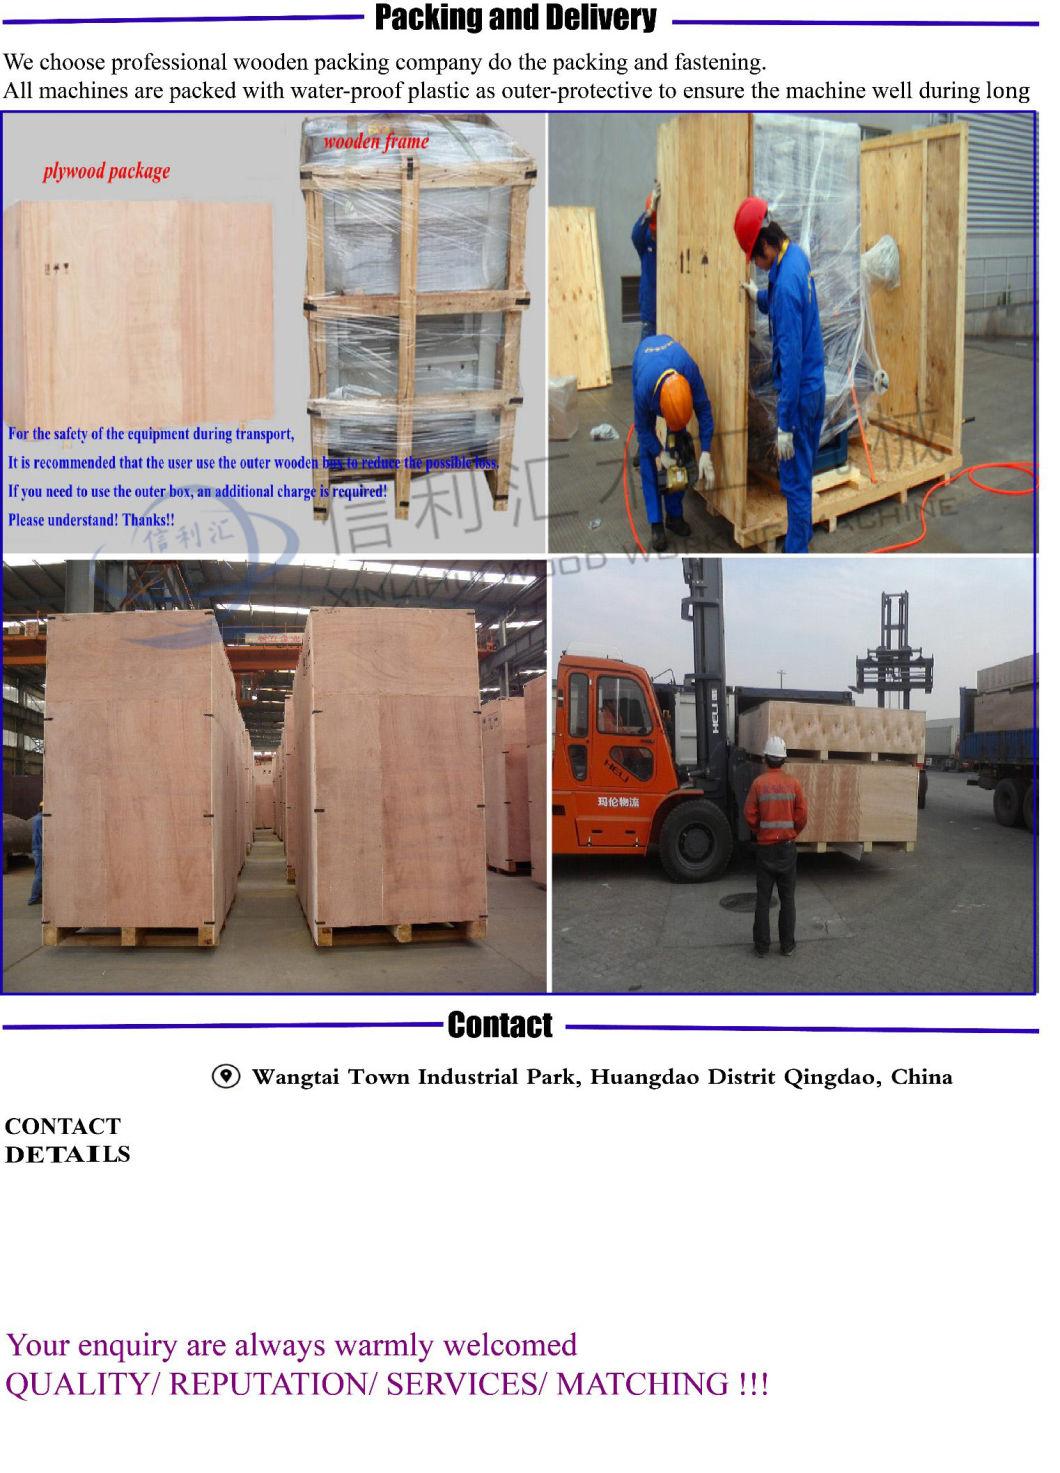 Hot Press Wood Composer Wood Working Machine/ Pressing Birch on Plywood Core/ Composite Board Wood Punching Machine